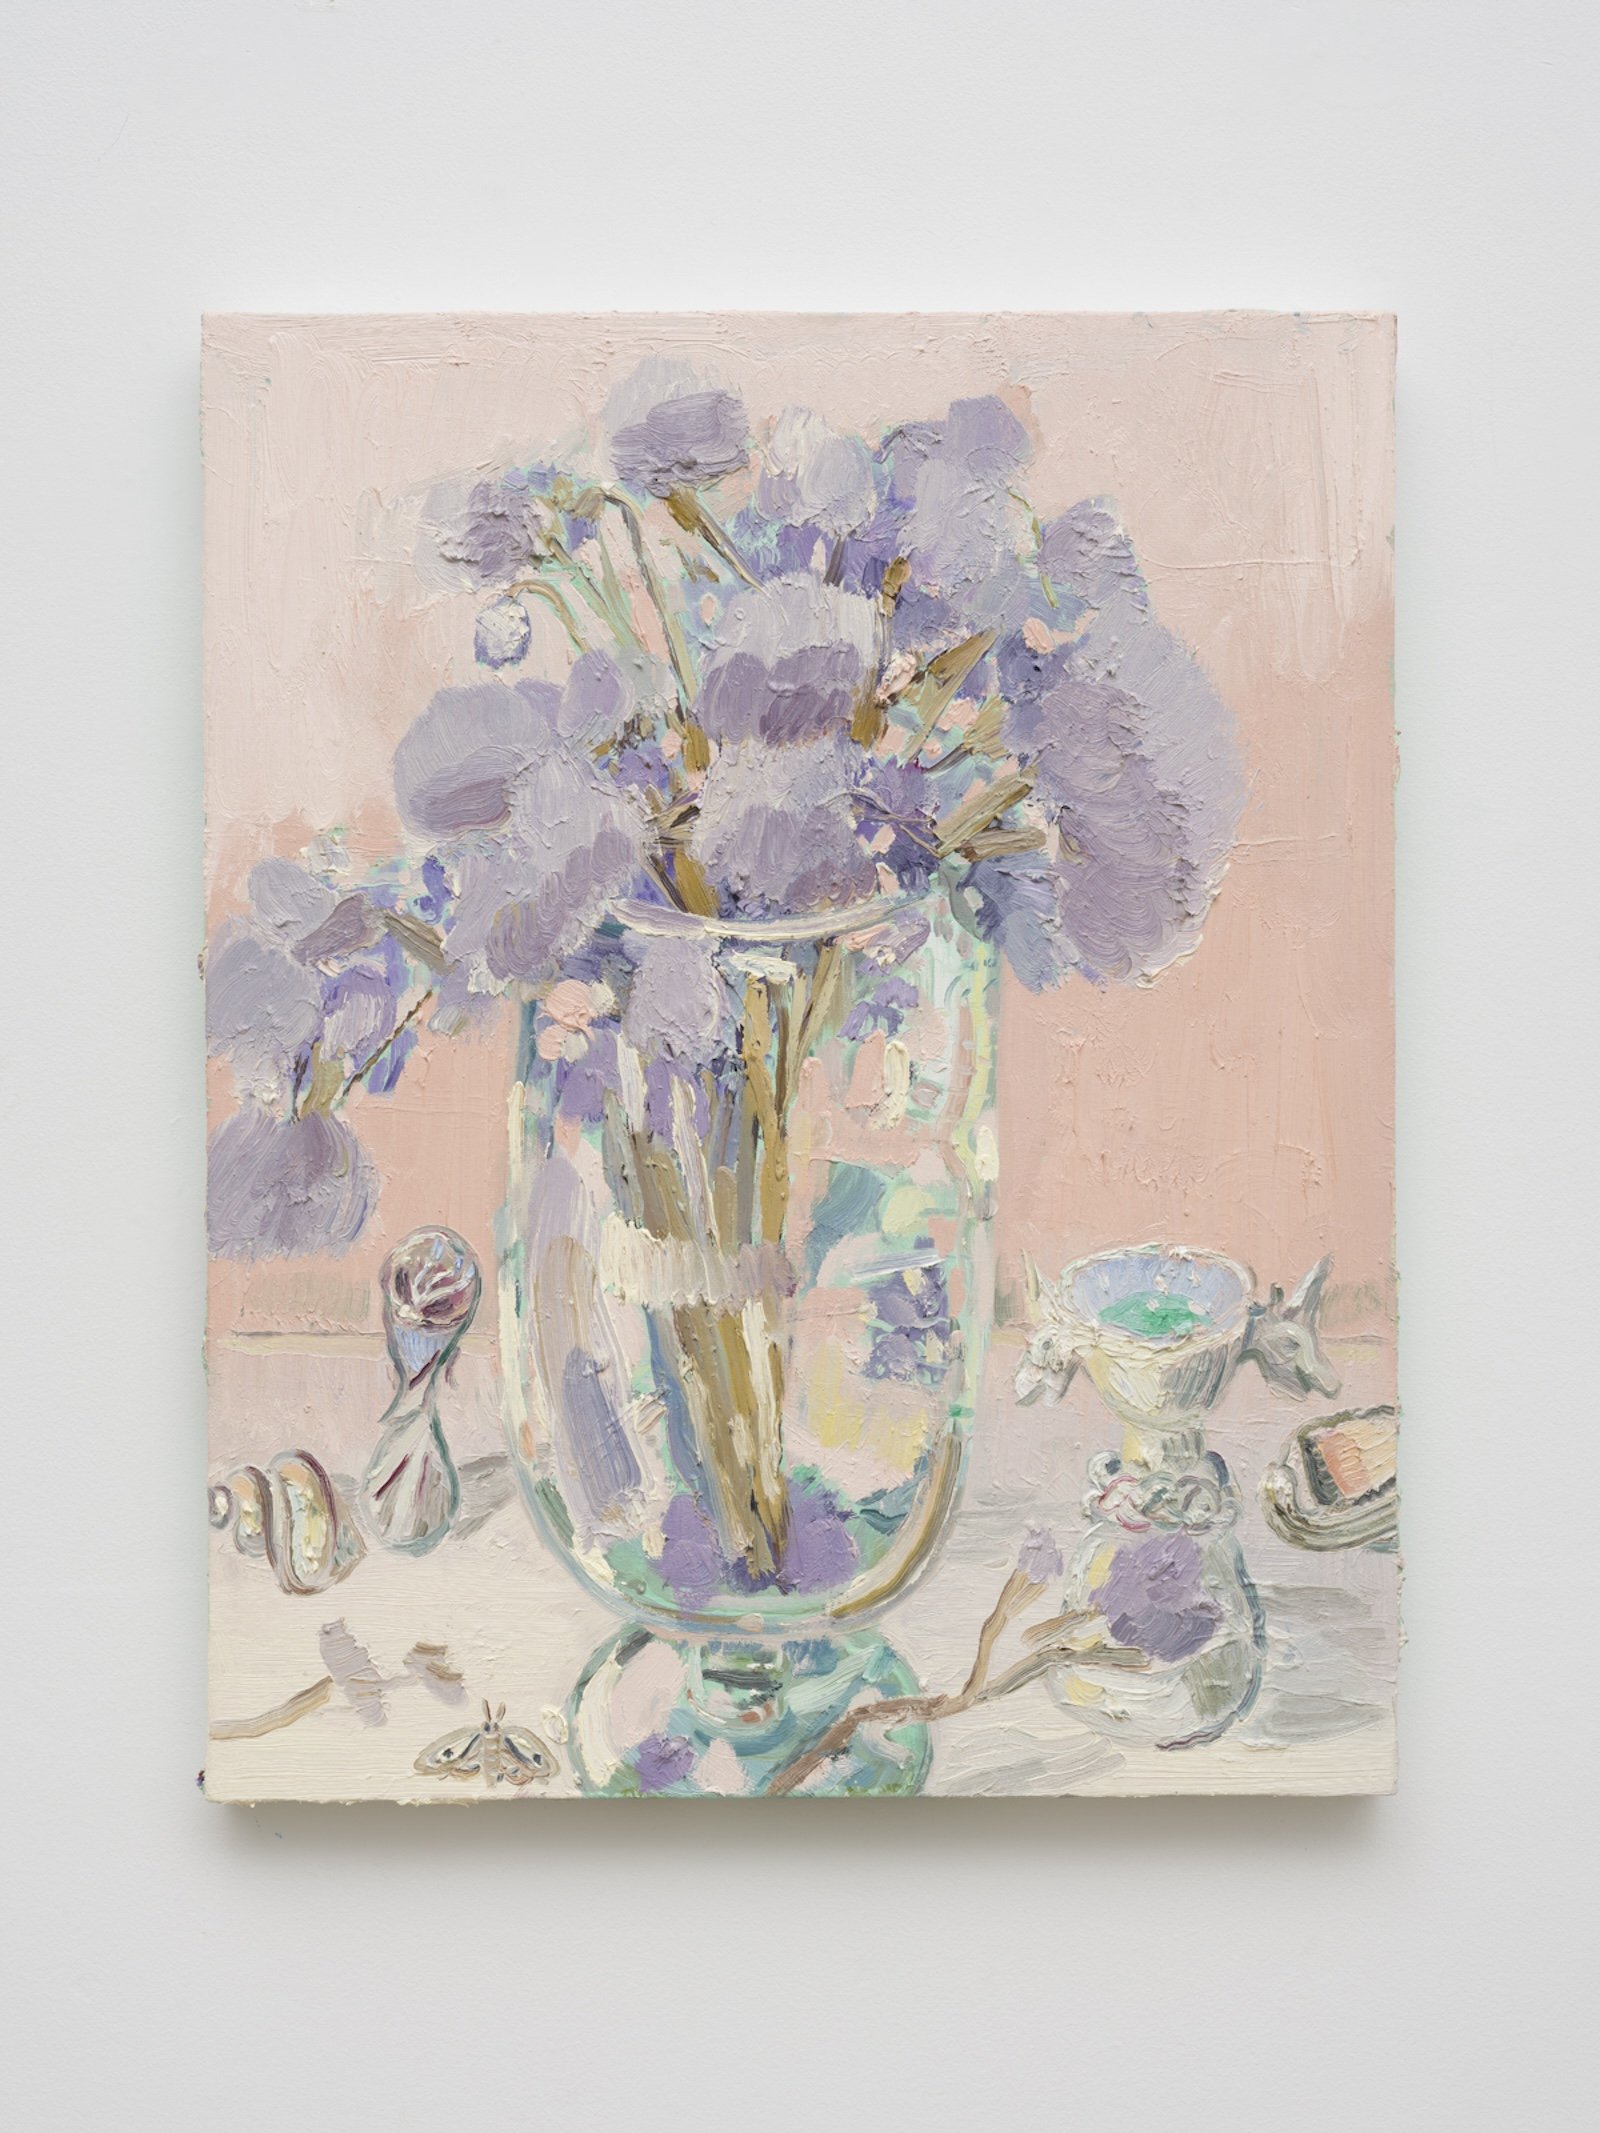  Allison Schulnik  Sea Lavender with Pink Goblets and Shells, 2023  Oil on canvas  30 x 24 in.  76.2 x 60.96 cm 